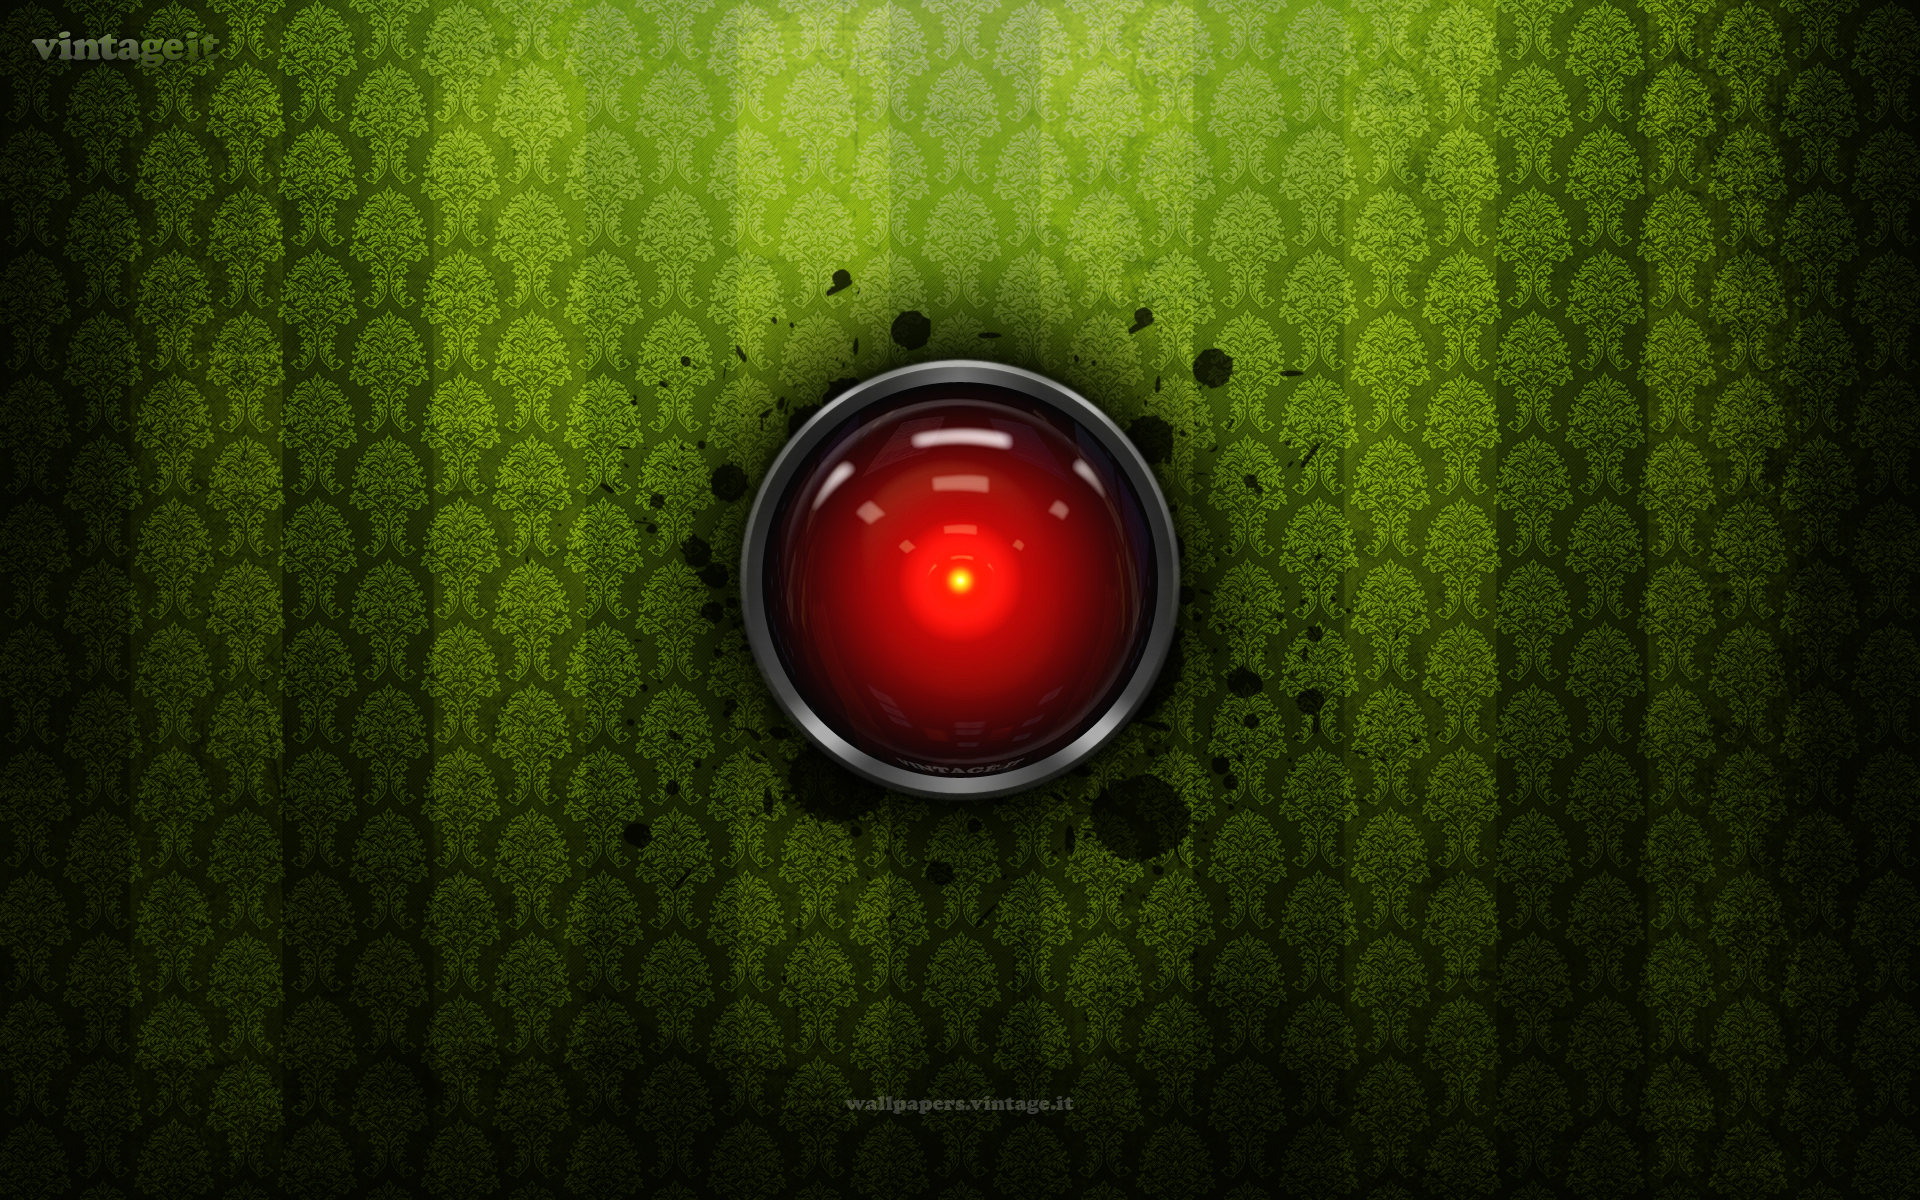 Hal Wallpaper Picture Pictures To Pin